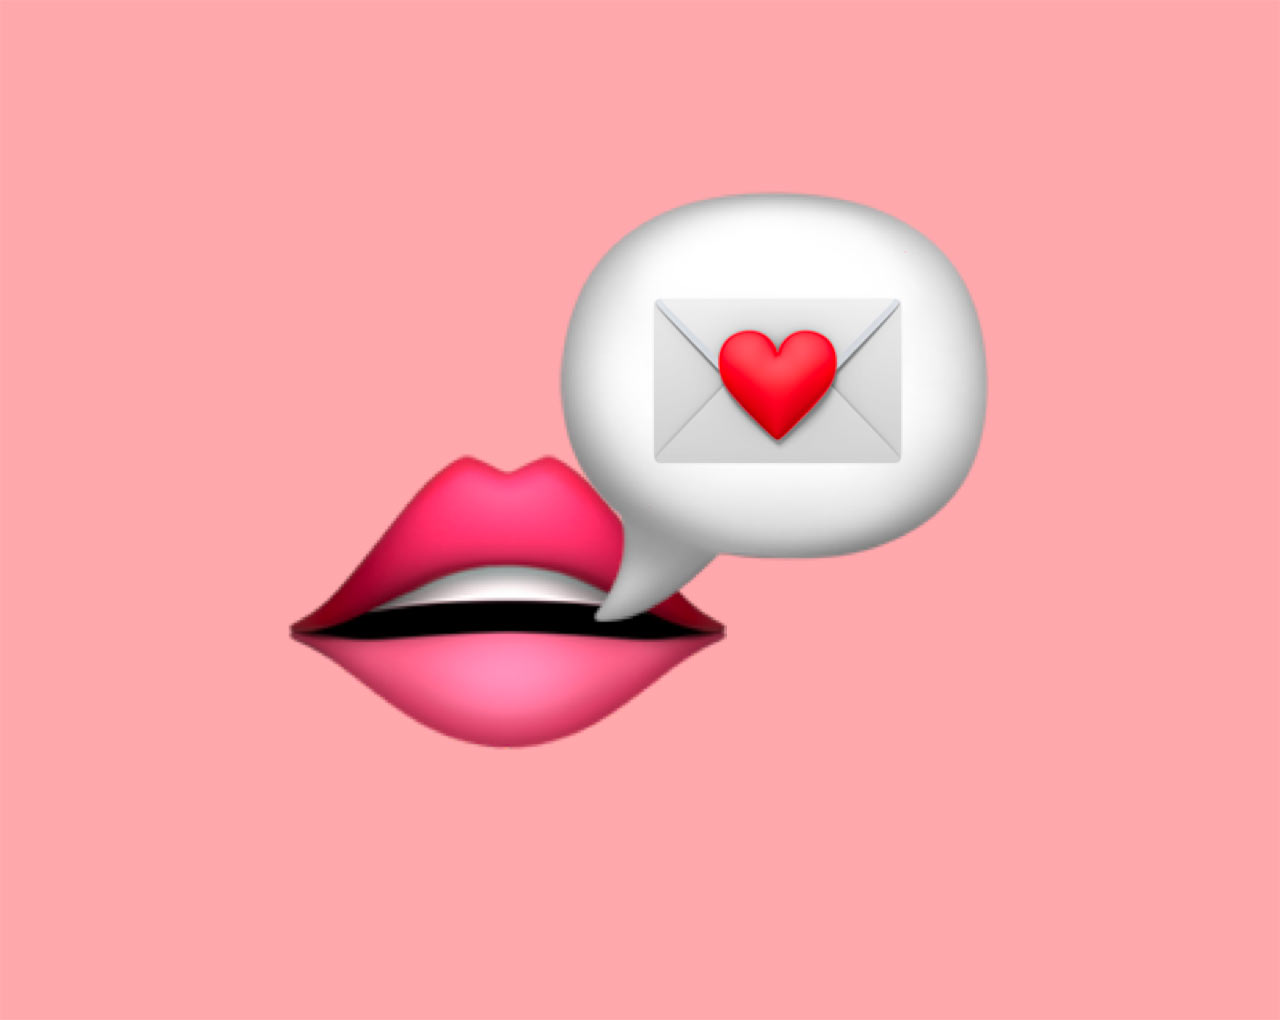 A mouth emoji with a speech bubble containing a love letter, illustrating how word of mouth works.